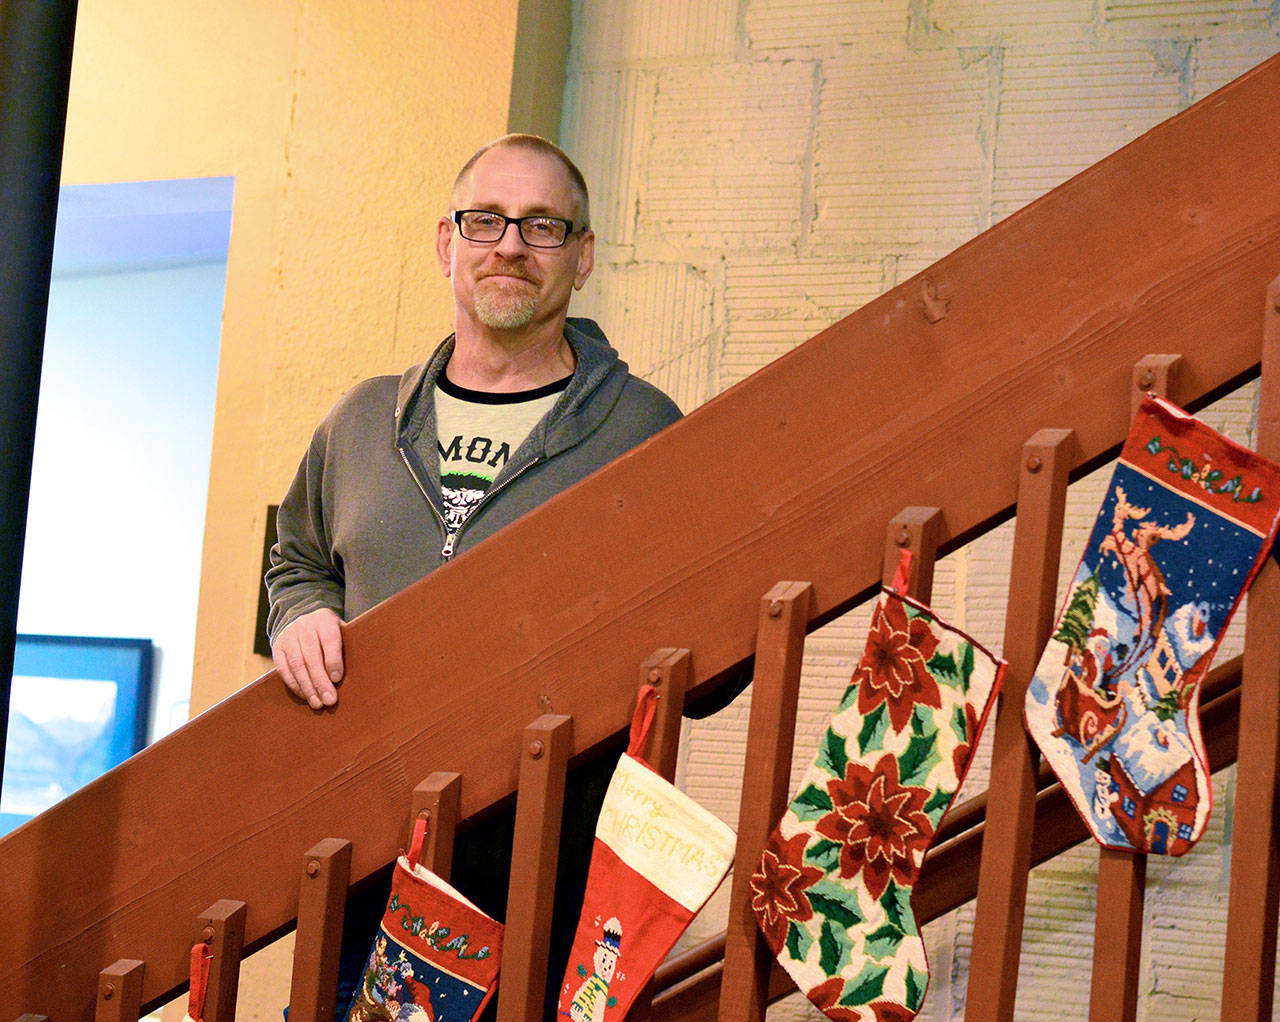 Tim Ufford stayed at Bayside Housing in Port Hadlock before finding a new apartment in time for Christmas. The Peninsula Home Fund helped cover his moving costs. (Diane Urbani de la Paz/For Peninsula Daily News)